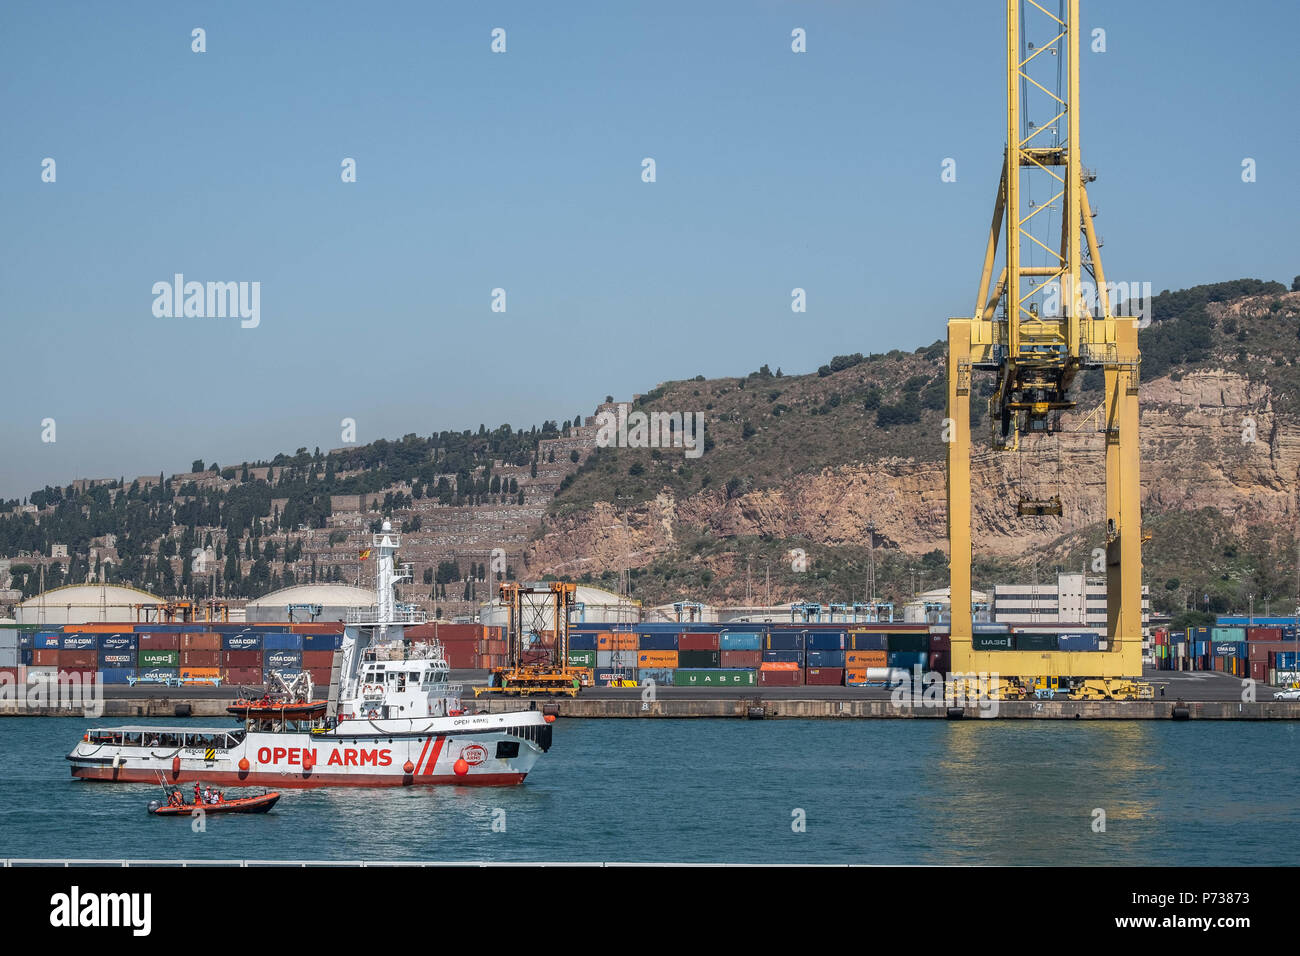 Barcelona, Catalonia, Spain. 4th July, 2018. The rescue boat Proactiva Open Arms has docked in Barcelona with 60 people rescued in the Mediterranean off the coast of Libya. Barcelona has offered itself as a refuge city after Italy's refusal to continue hosting more rescues carried out by NGOs. Credit: Paco Freire/SOPA Images/ZUMA Wire/Alamy Live News Stock Photo